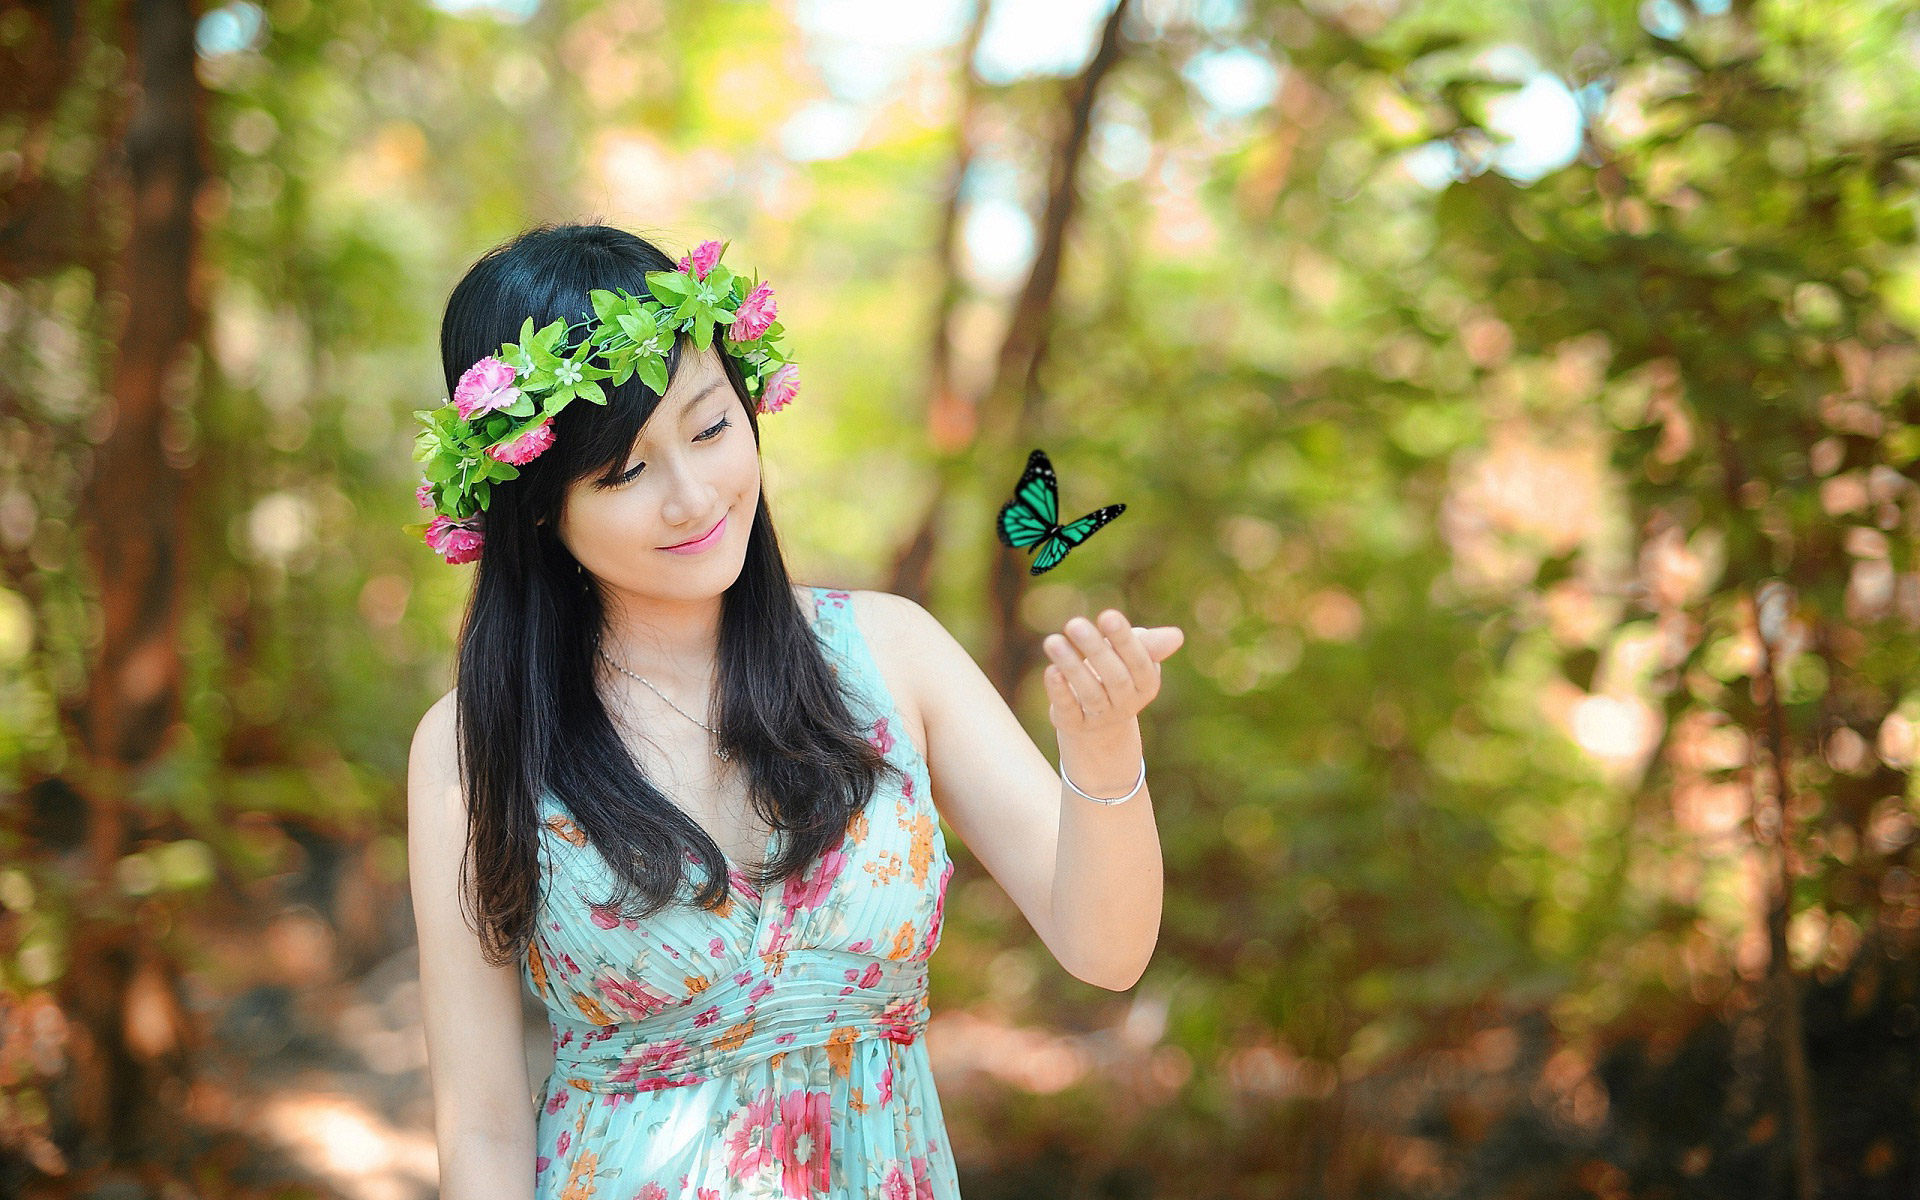 Butterfly Images With Girl - HD Wallpaper 